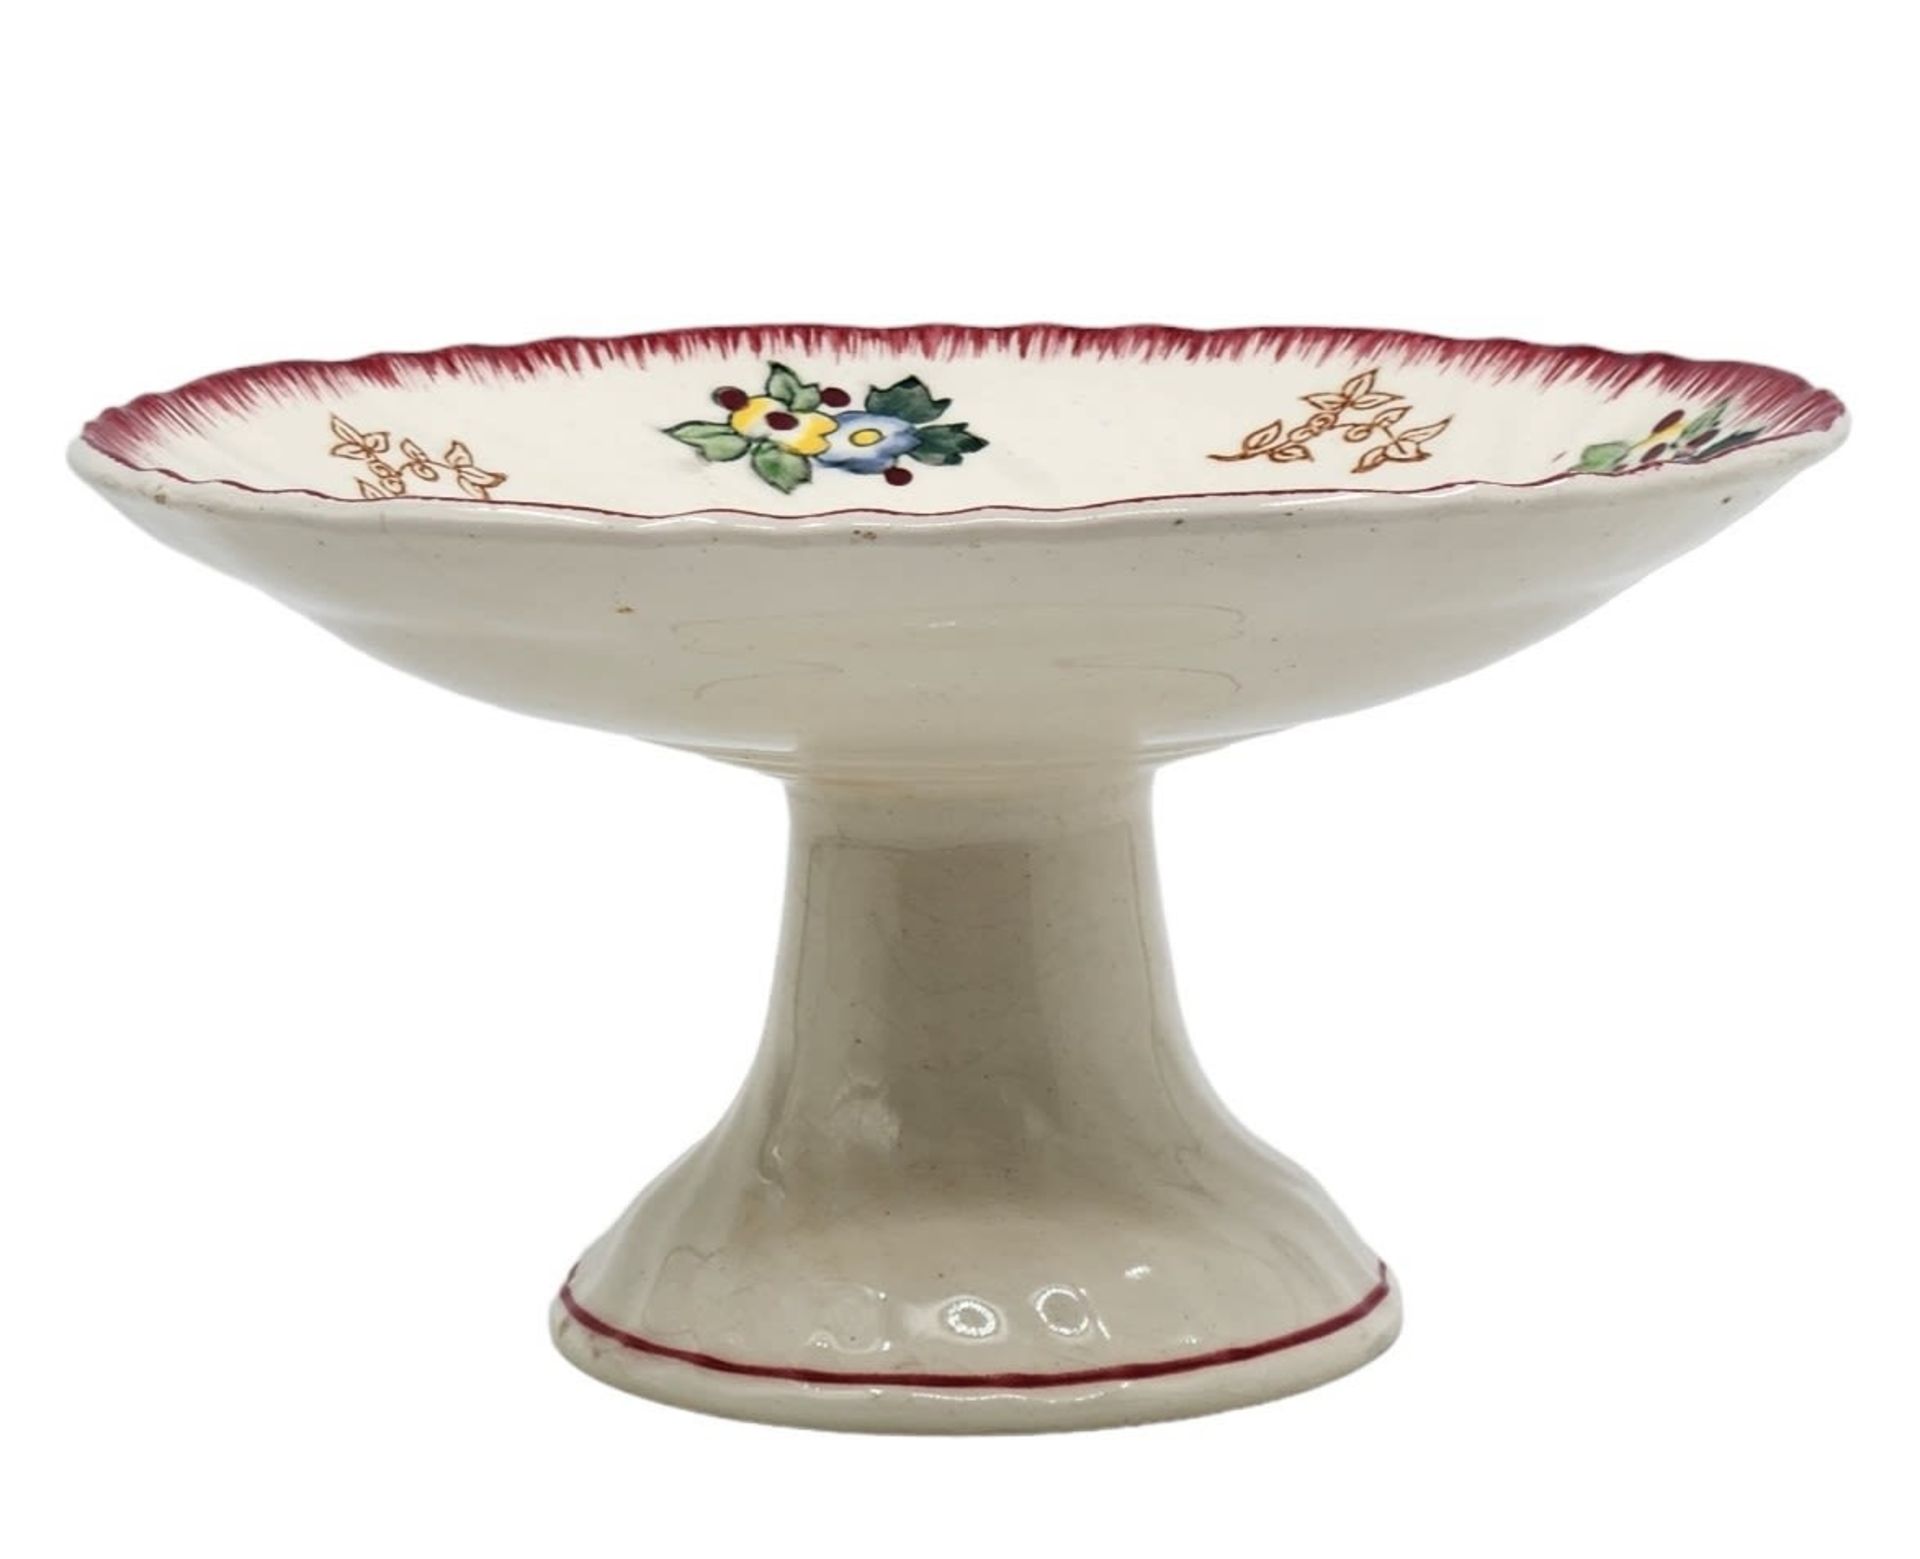 Old French Tessa, made by: 'Longwy', for serving and refreshments, decorated with hand-painted